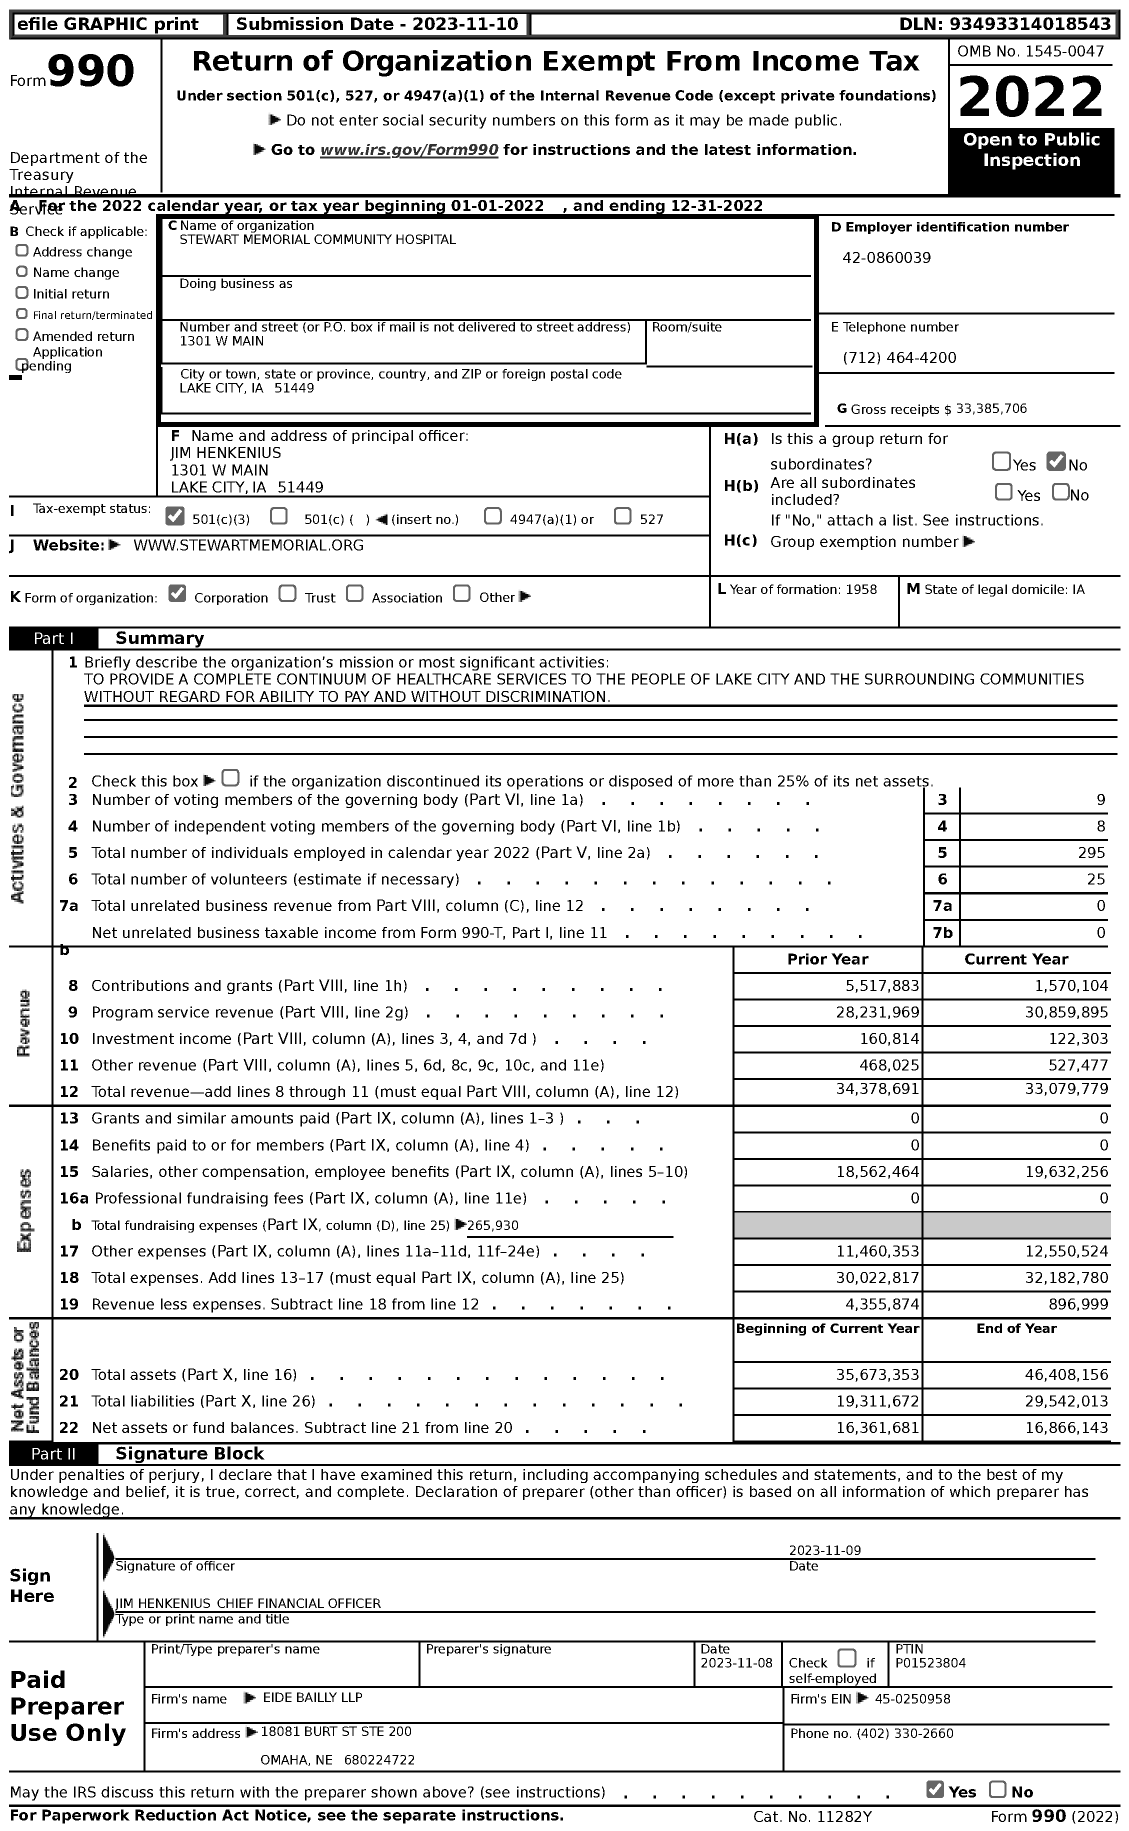 Image of first page of 2022 Form 990 for Stewart Memorial Community Hospital